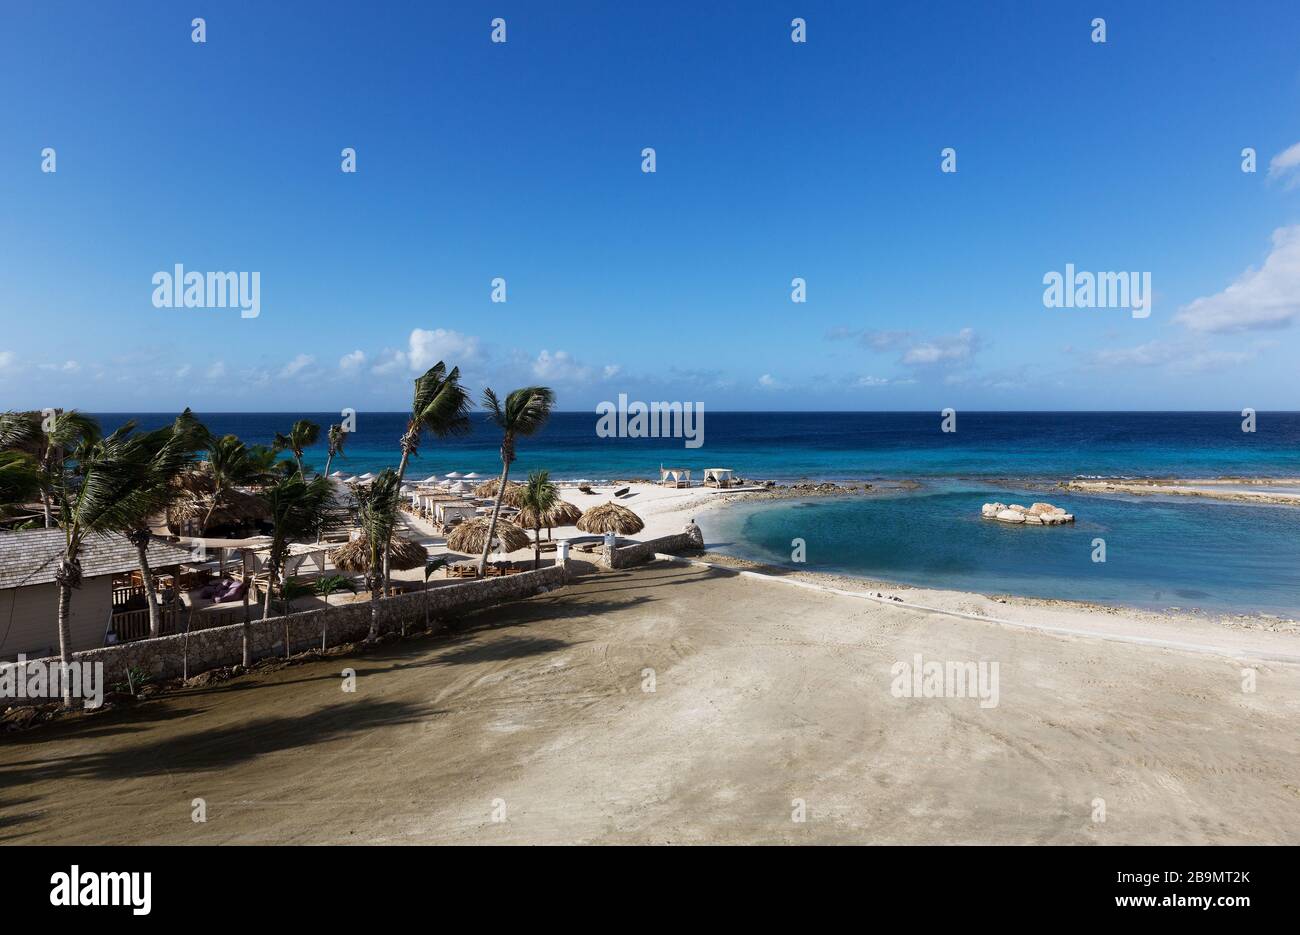 Tropical beach and turquise waters of Bonaire, Caribbean Stock Photo